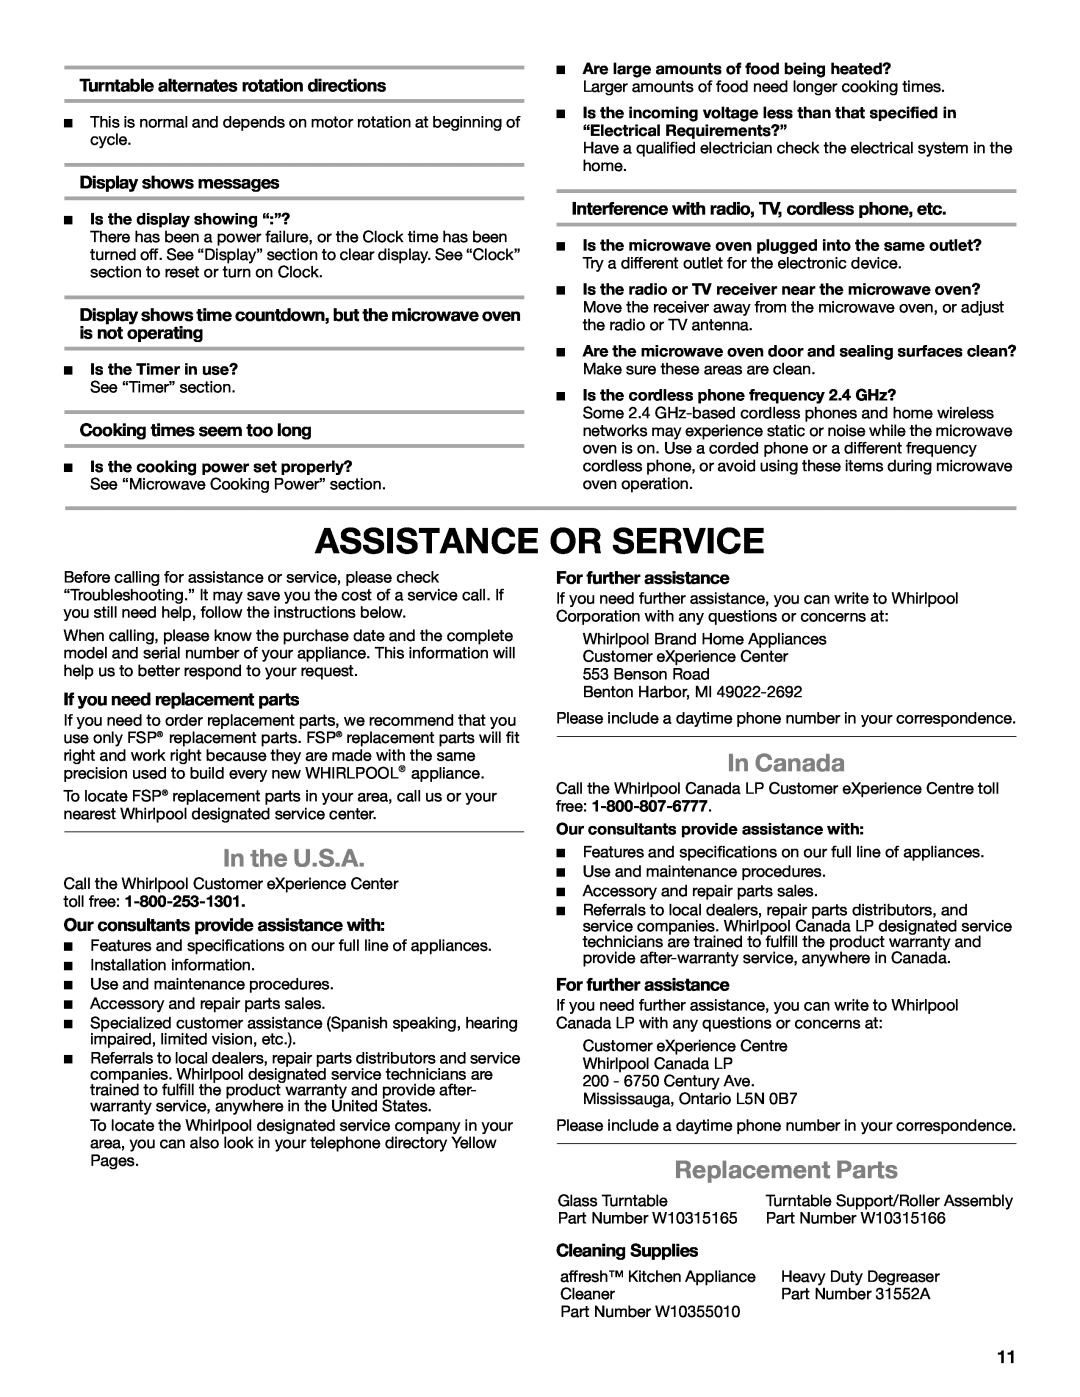 Whirlpool WMC10007 manual Assistance Or Service, In the U.S.A, In Canada, Replacement Parts 